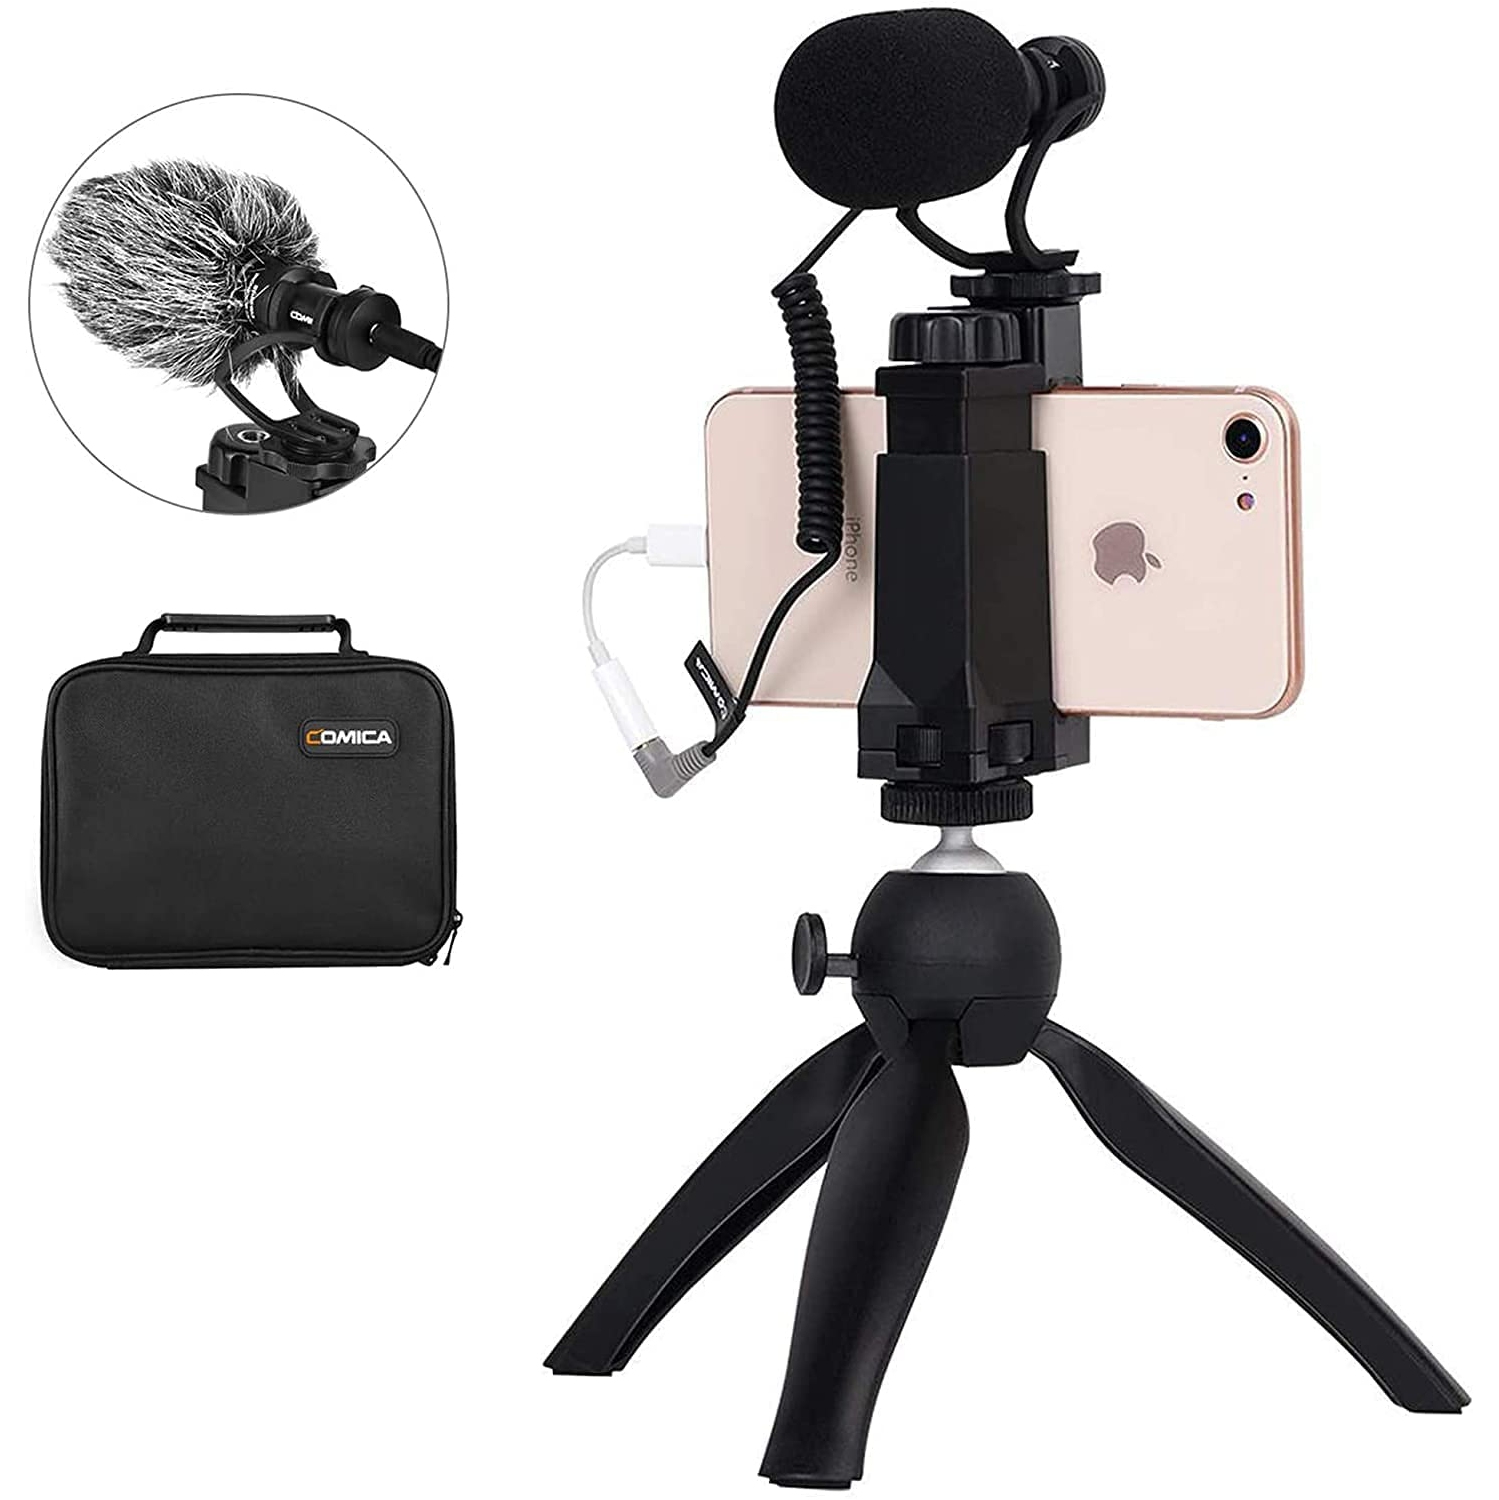 CVM-VM10-K2 Smartphone Microphone Kit with Tripod, Microphone for iPhone 6, 6S, 7, 8, X, XS, XS Max and Android